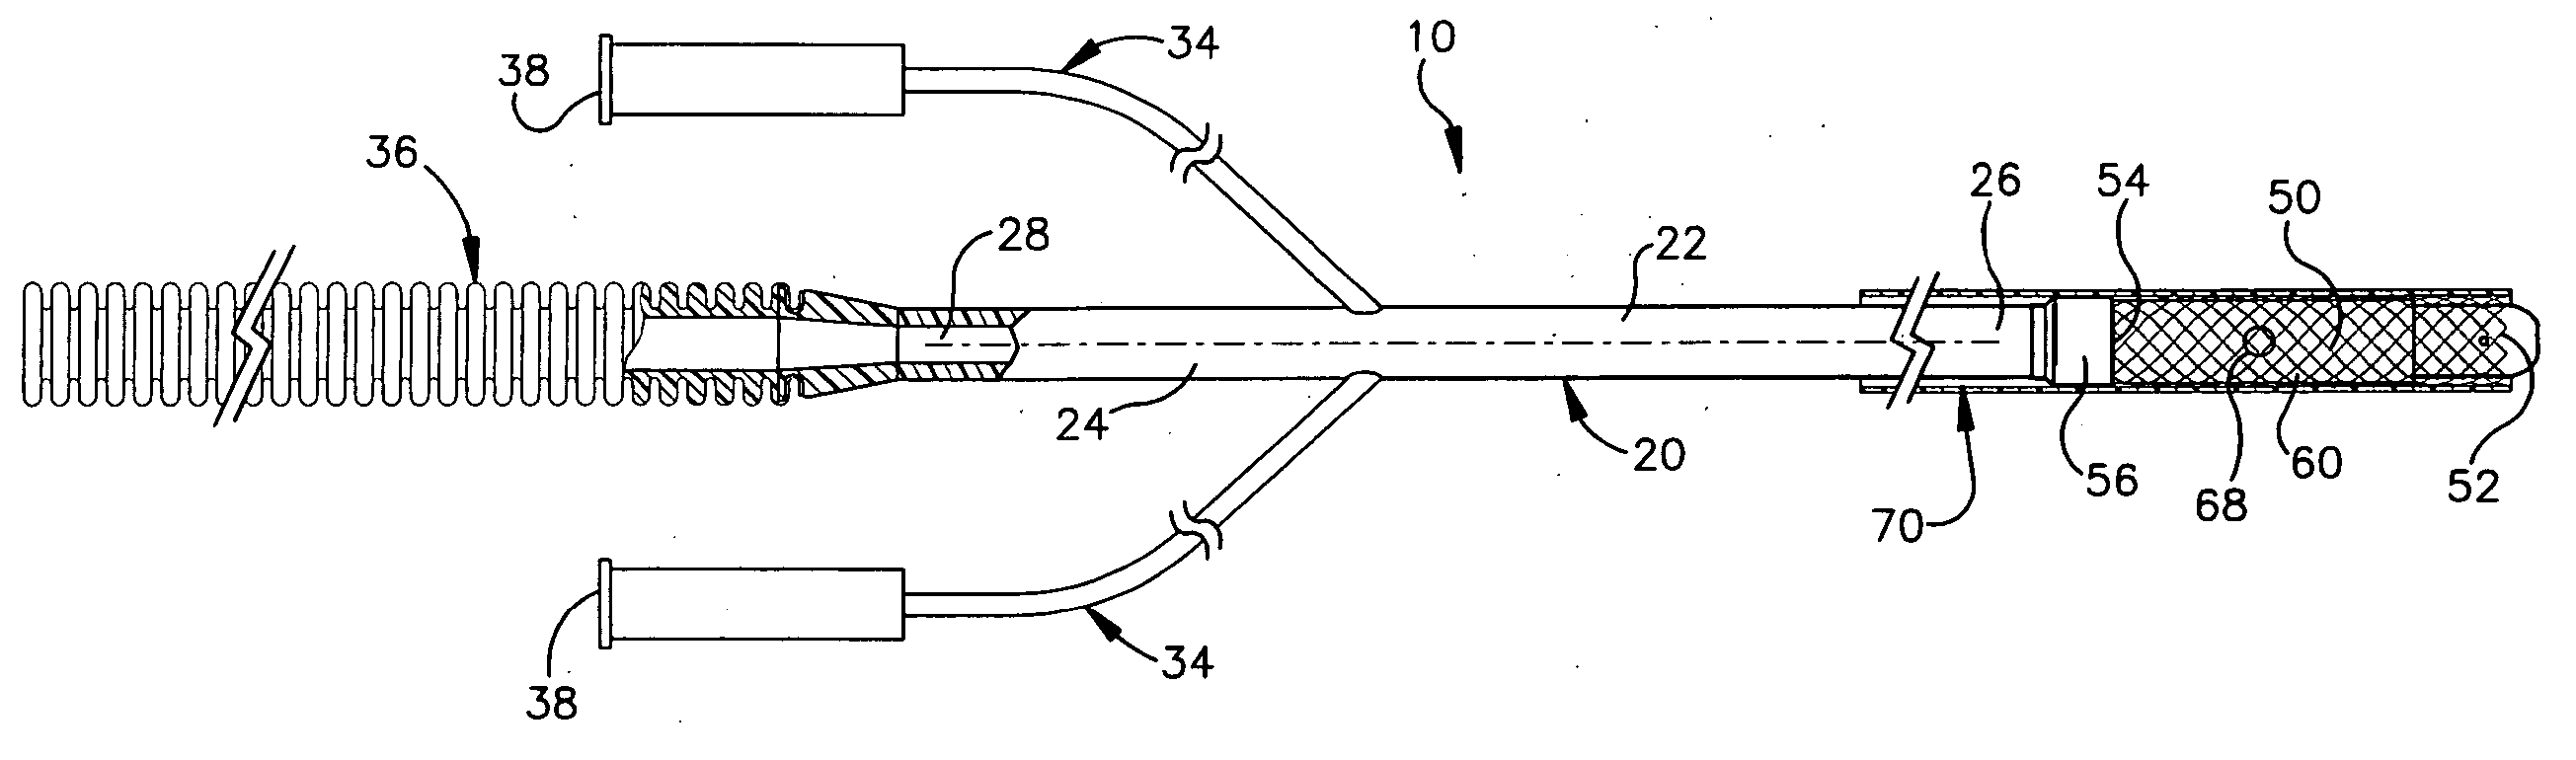 Apparatus and method for auto-retroperfusion of a coronary vein